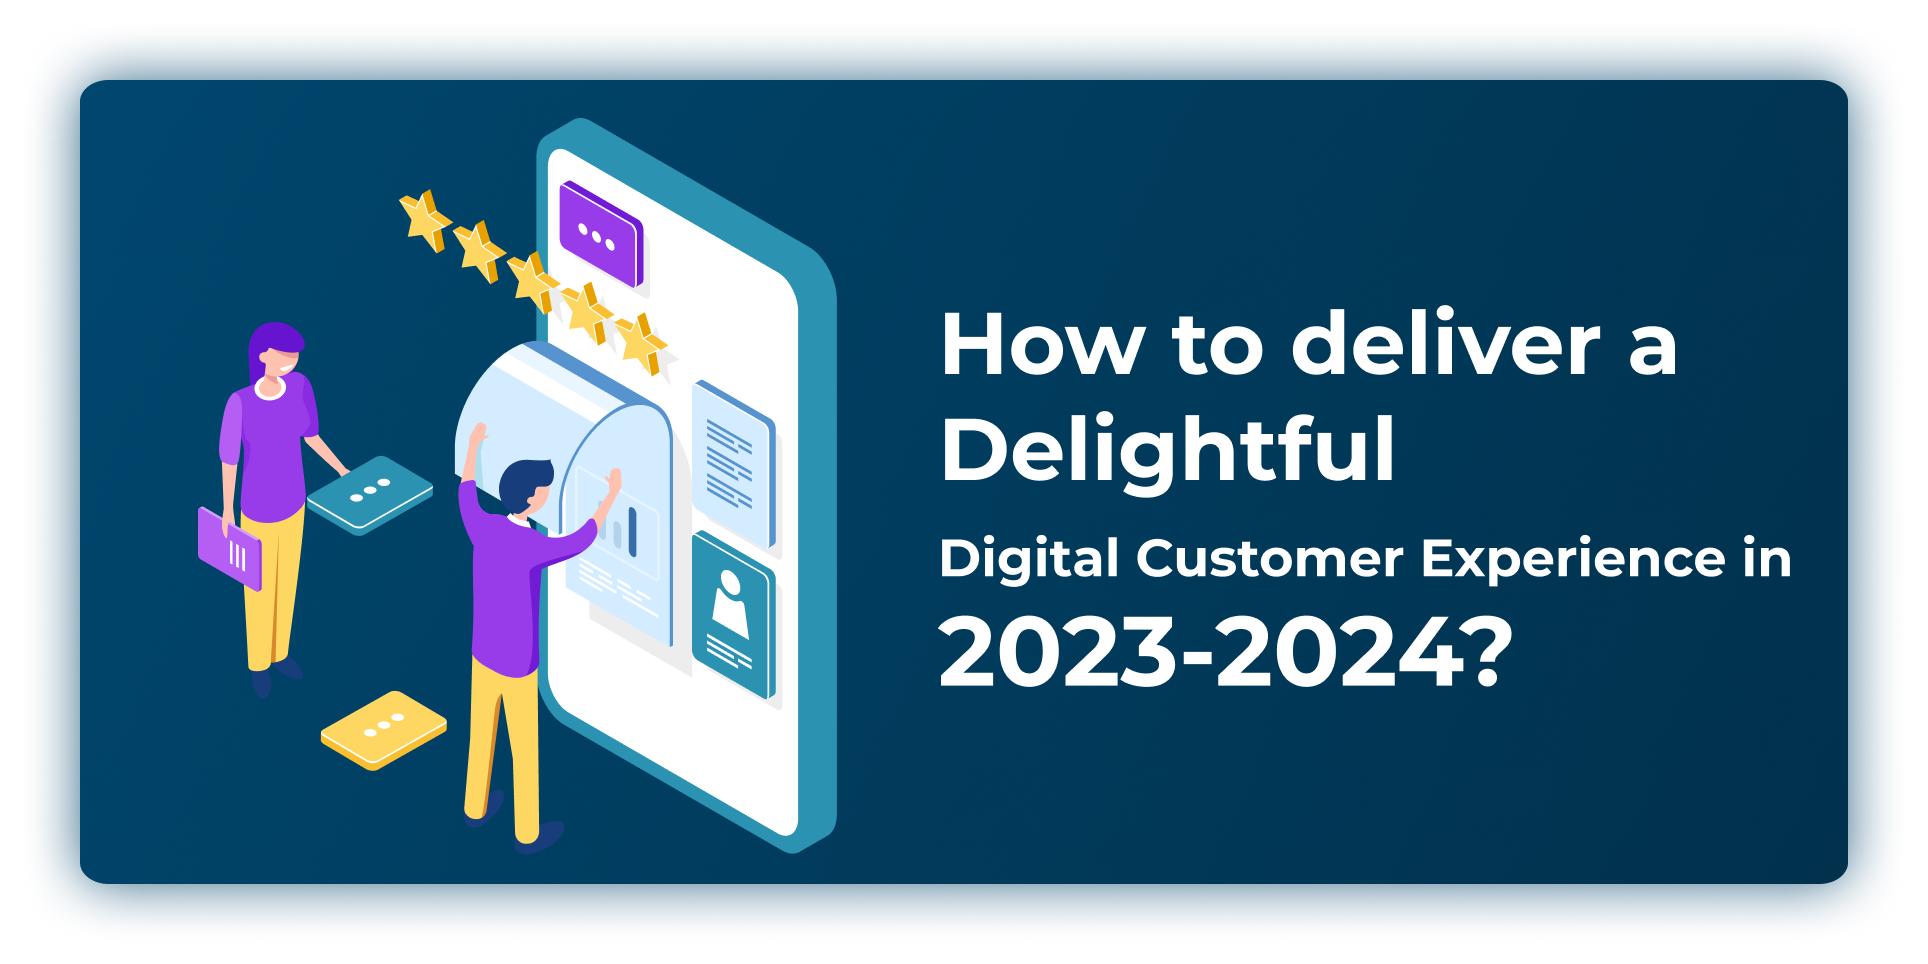 How to deliver a delightful digital customer experience in 2023-2024?